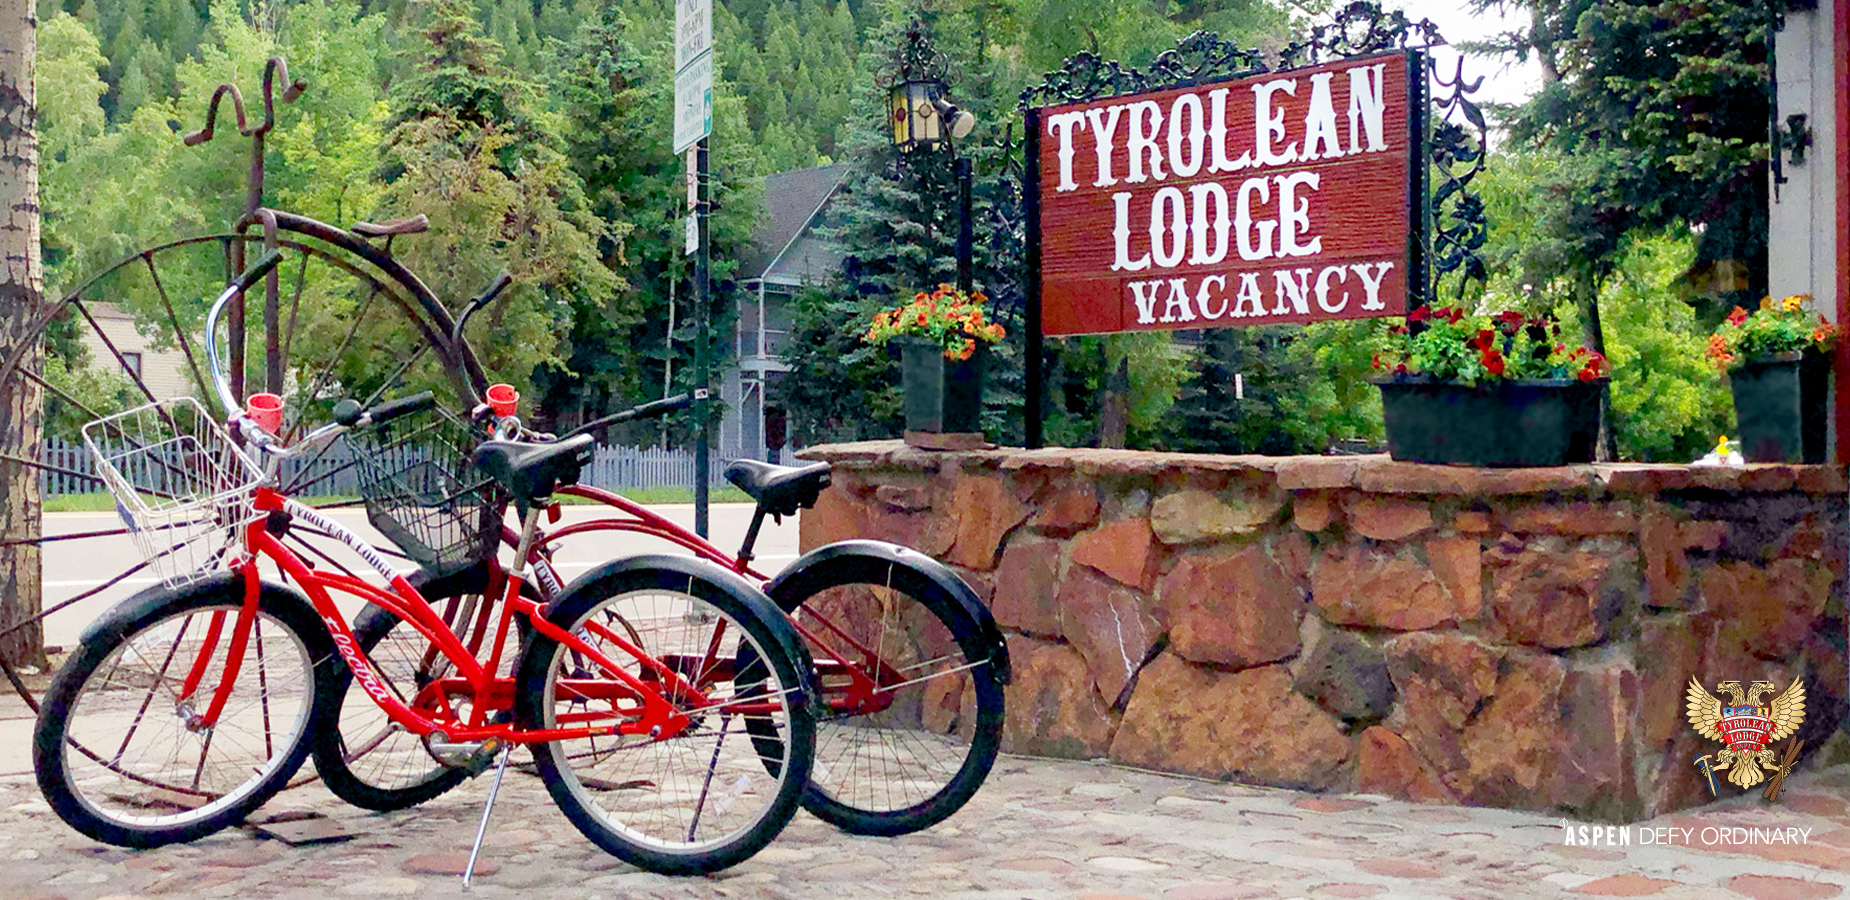 The Tyrolean offers free bicycles for summer rides around town